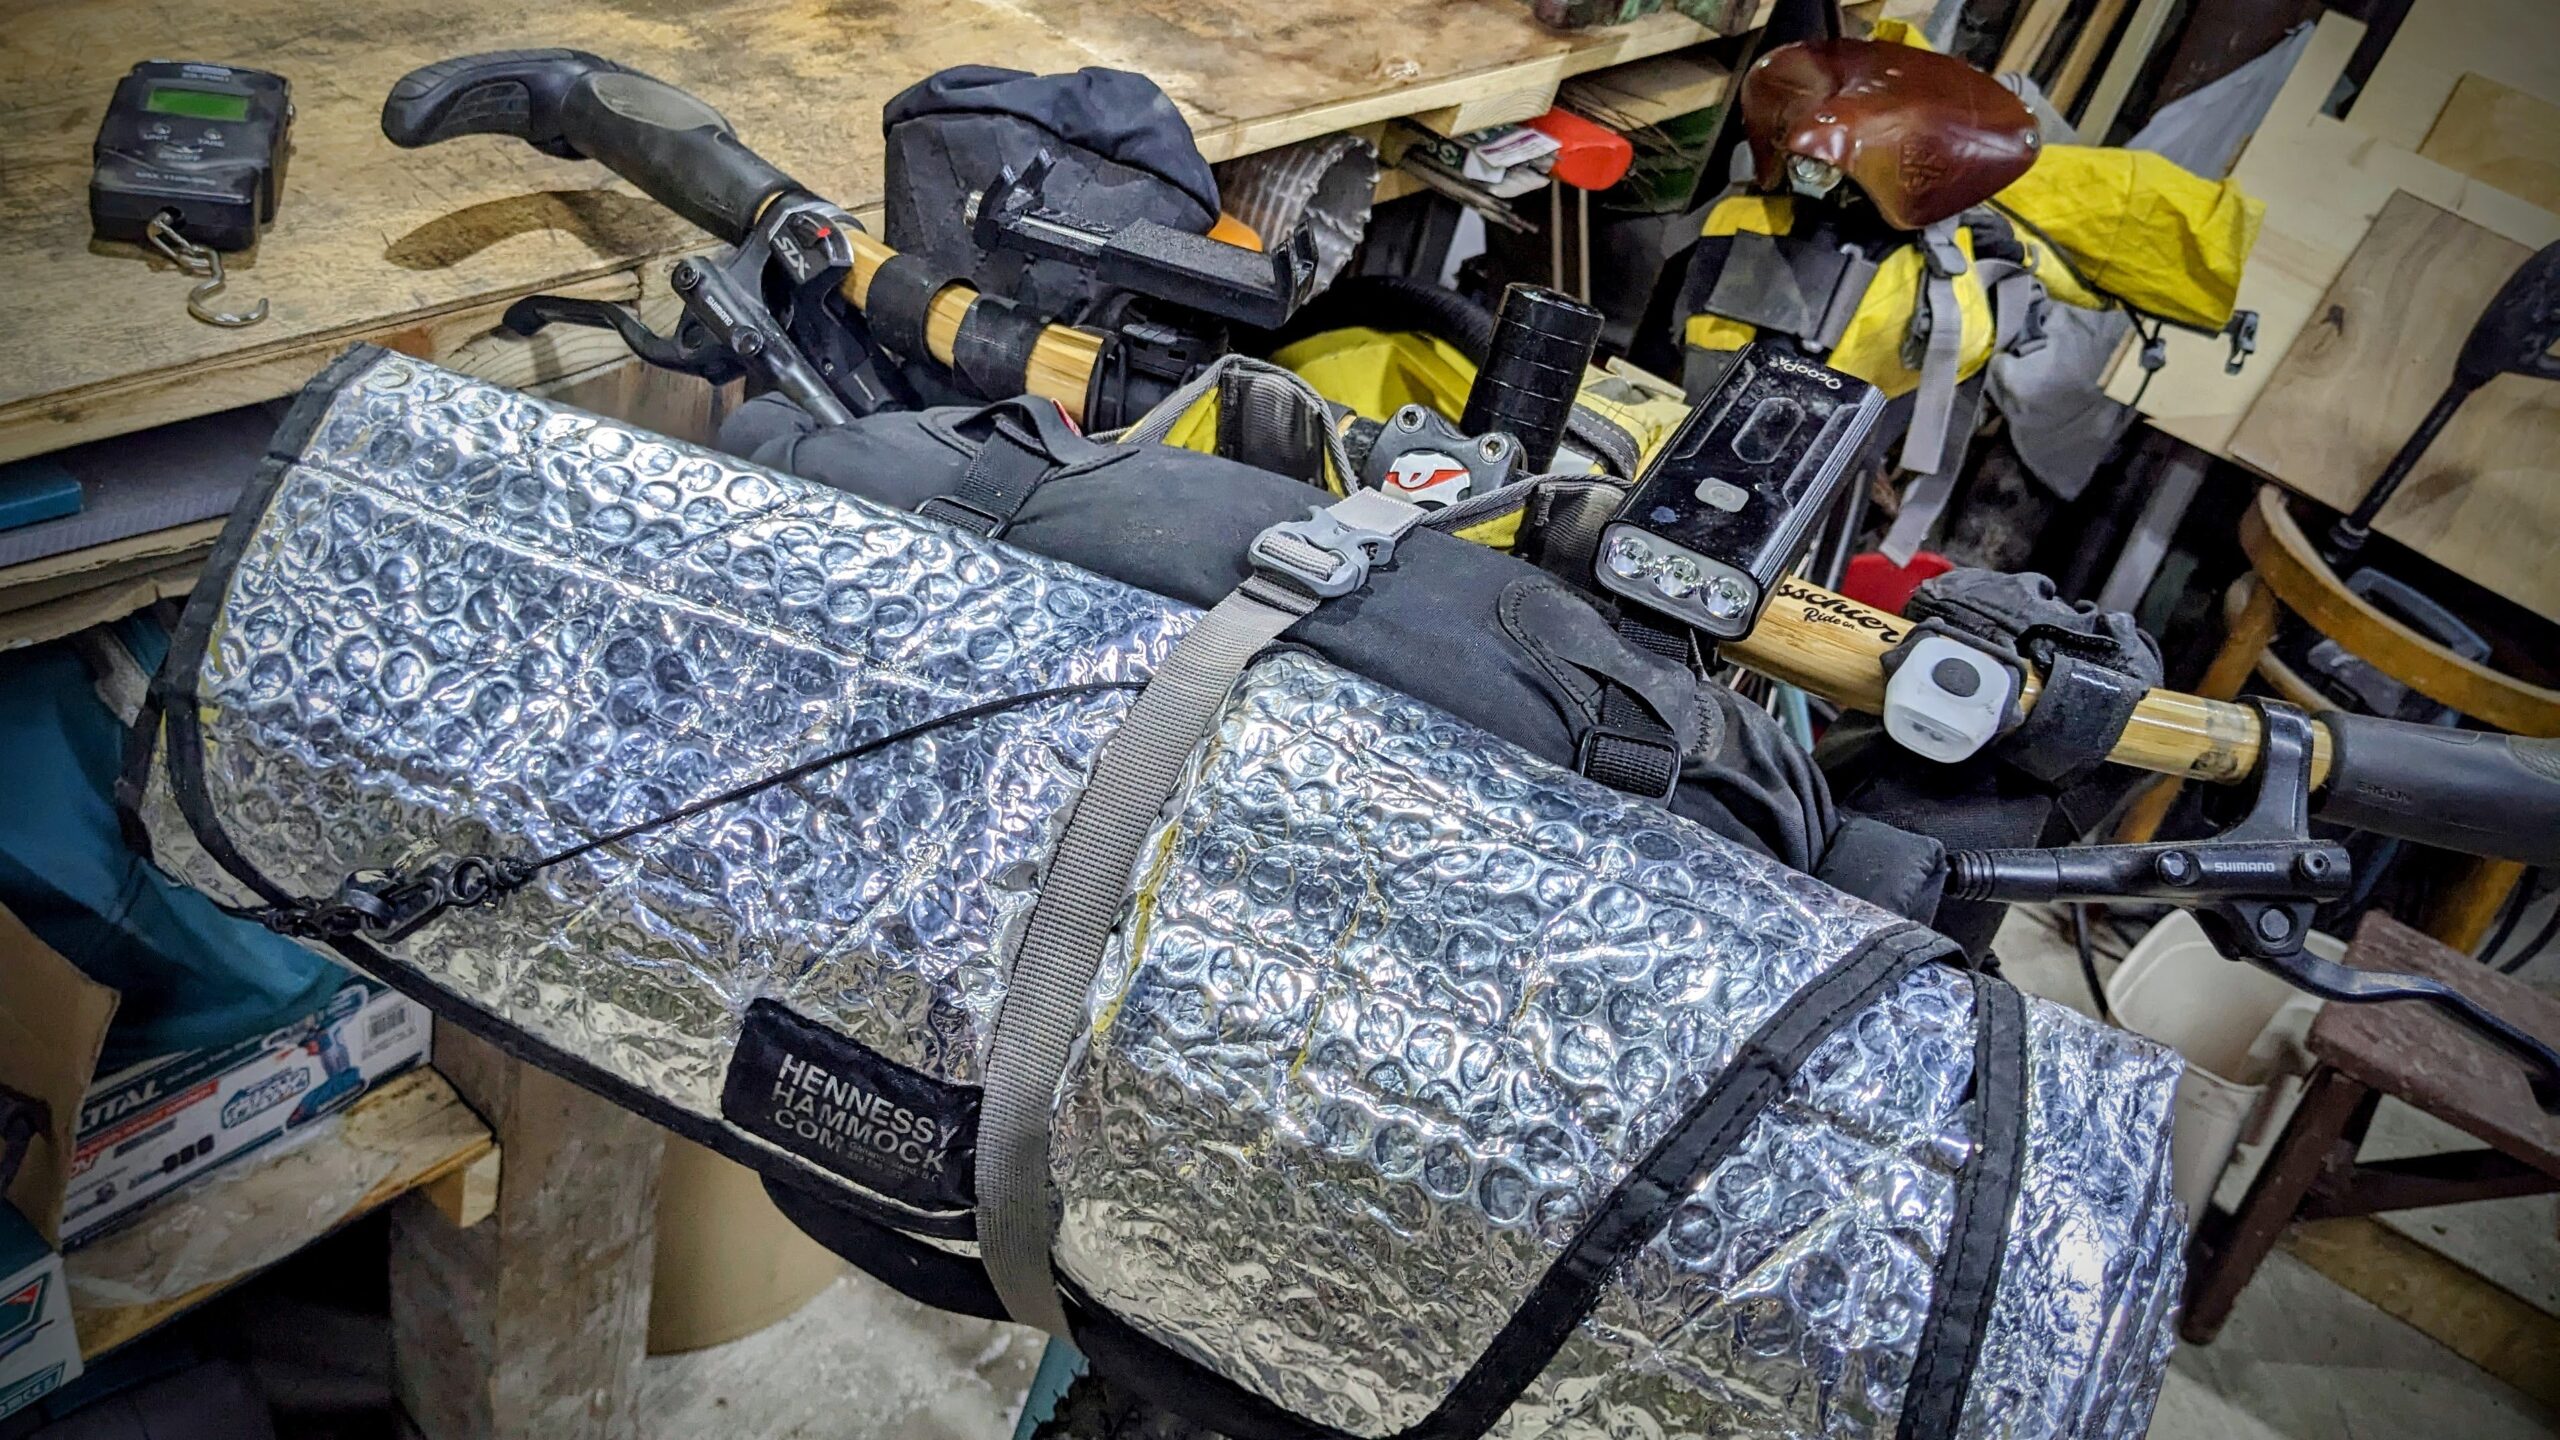 Tom's Bike Shed: Packing Ultralight Camping Gear For A Bikepacking Race  (Video)